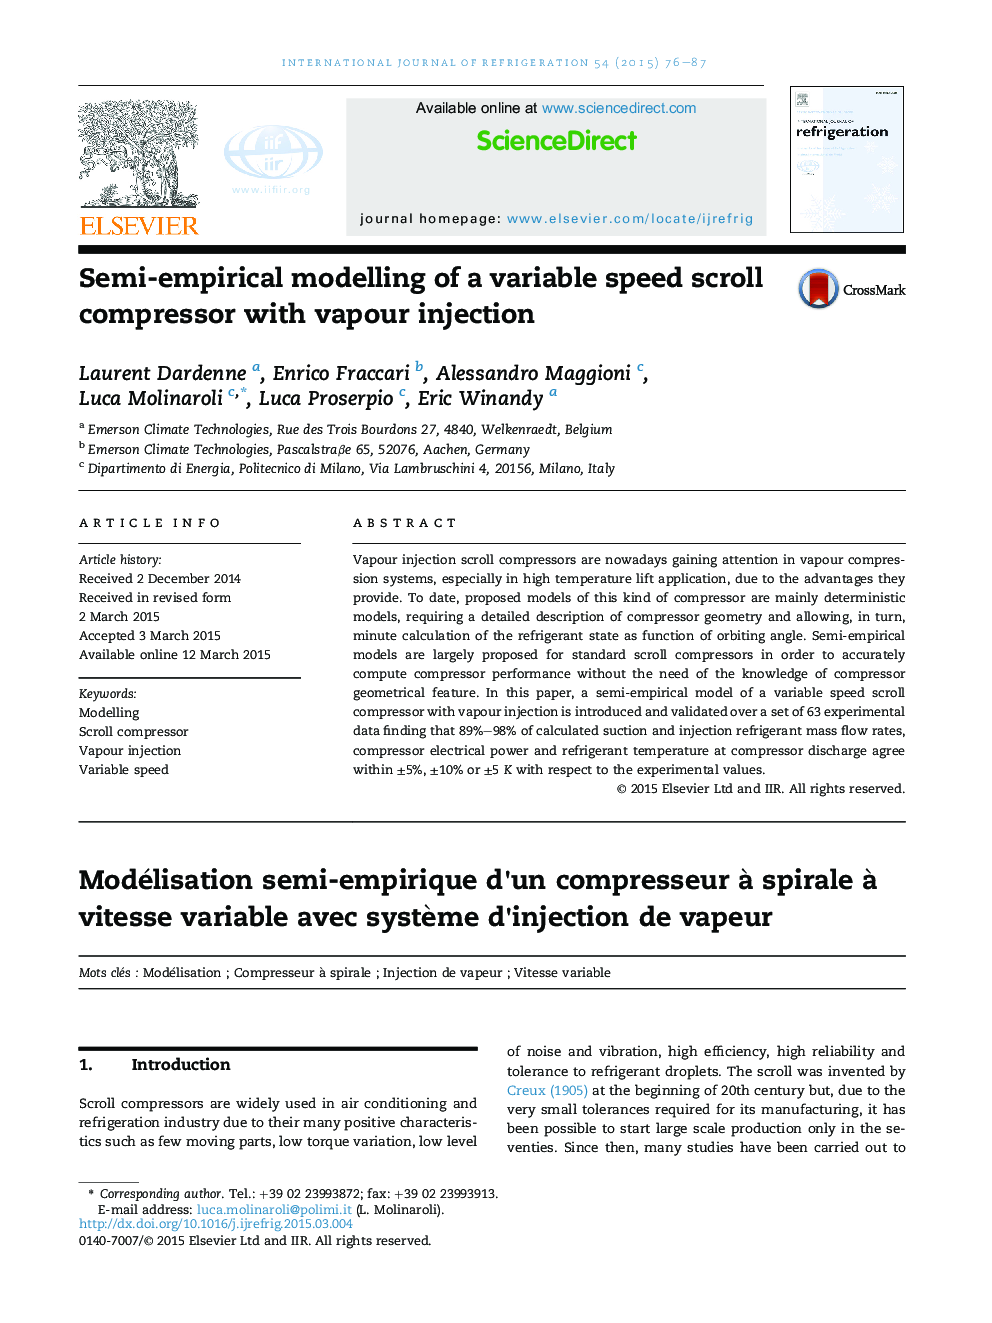 Semi-empirical modelling of a variable speed scroll compressor with vapour injection